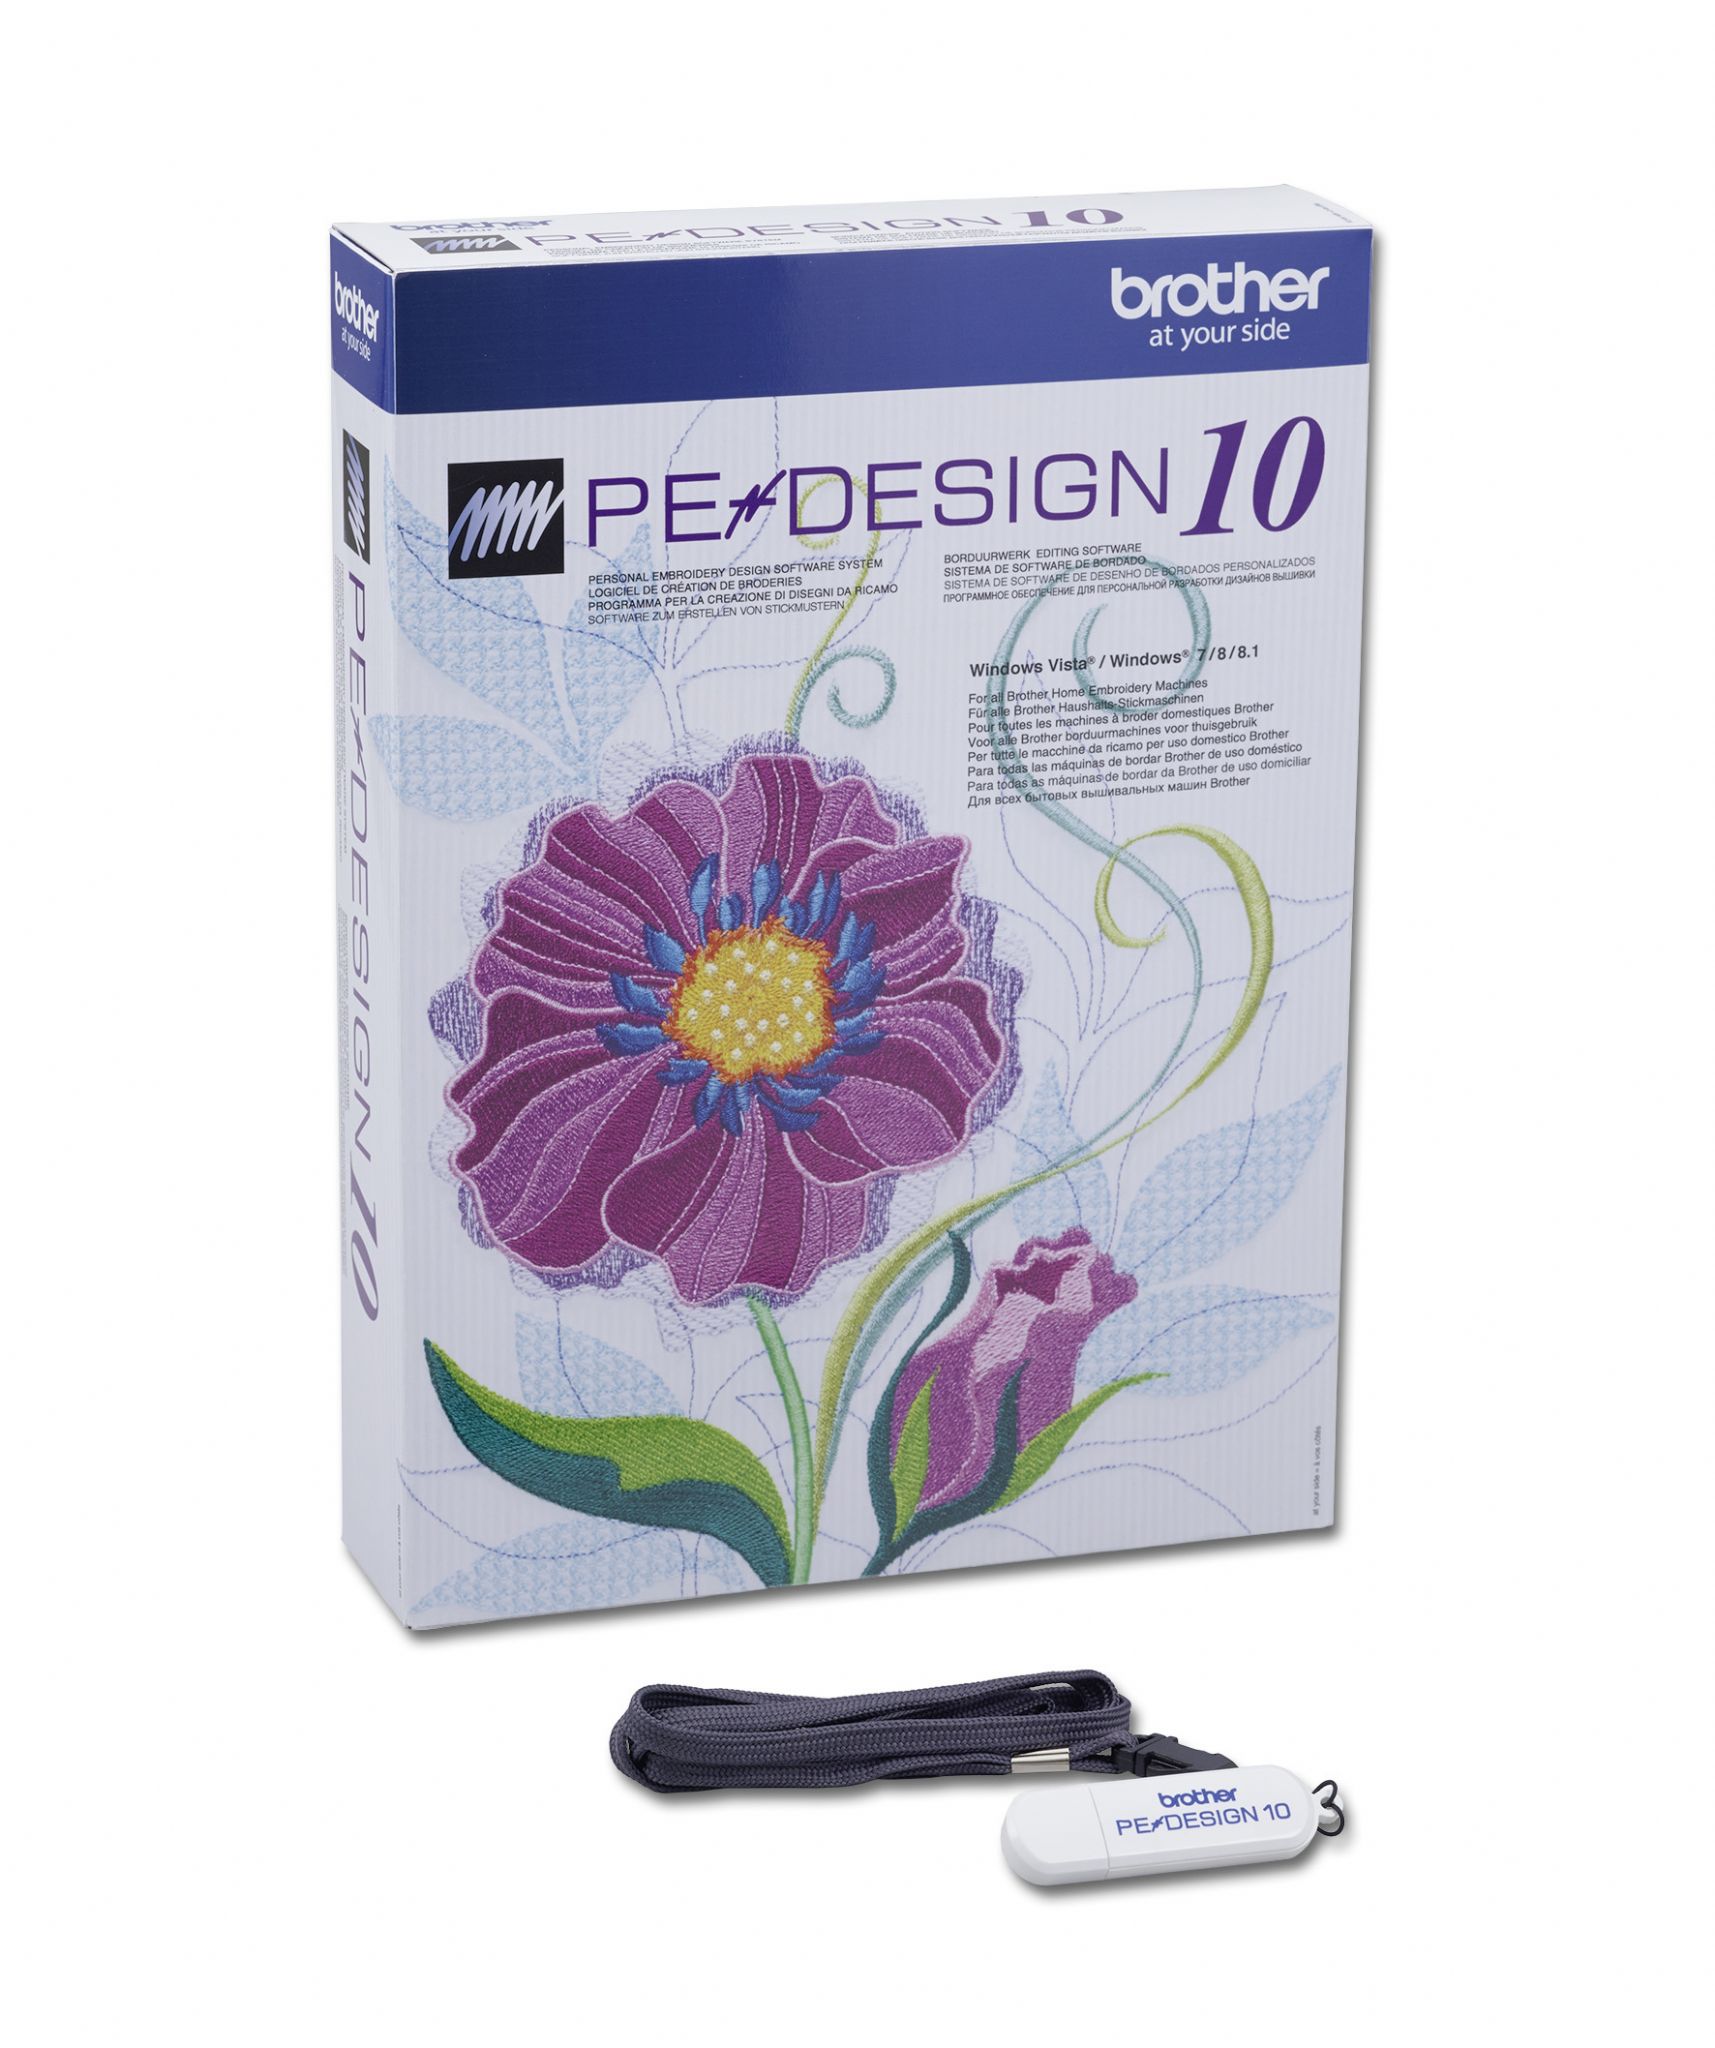 PE-DESIGN 10 Embroidery Software